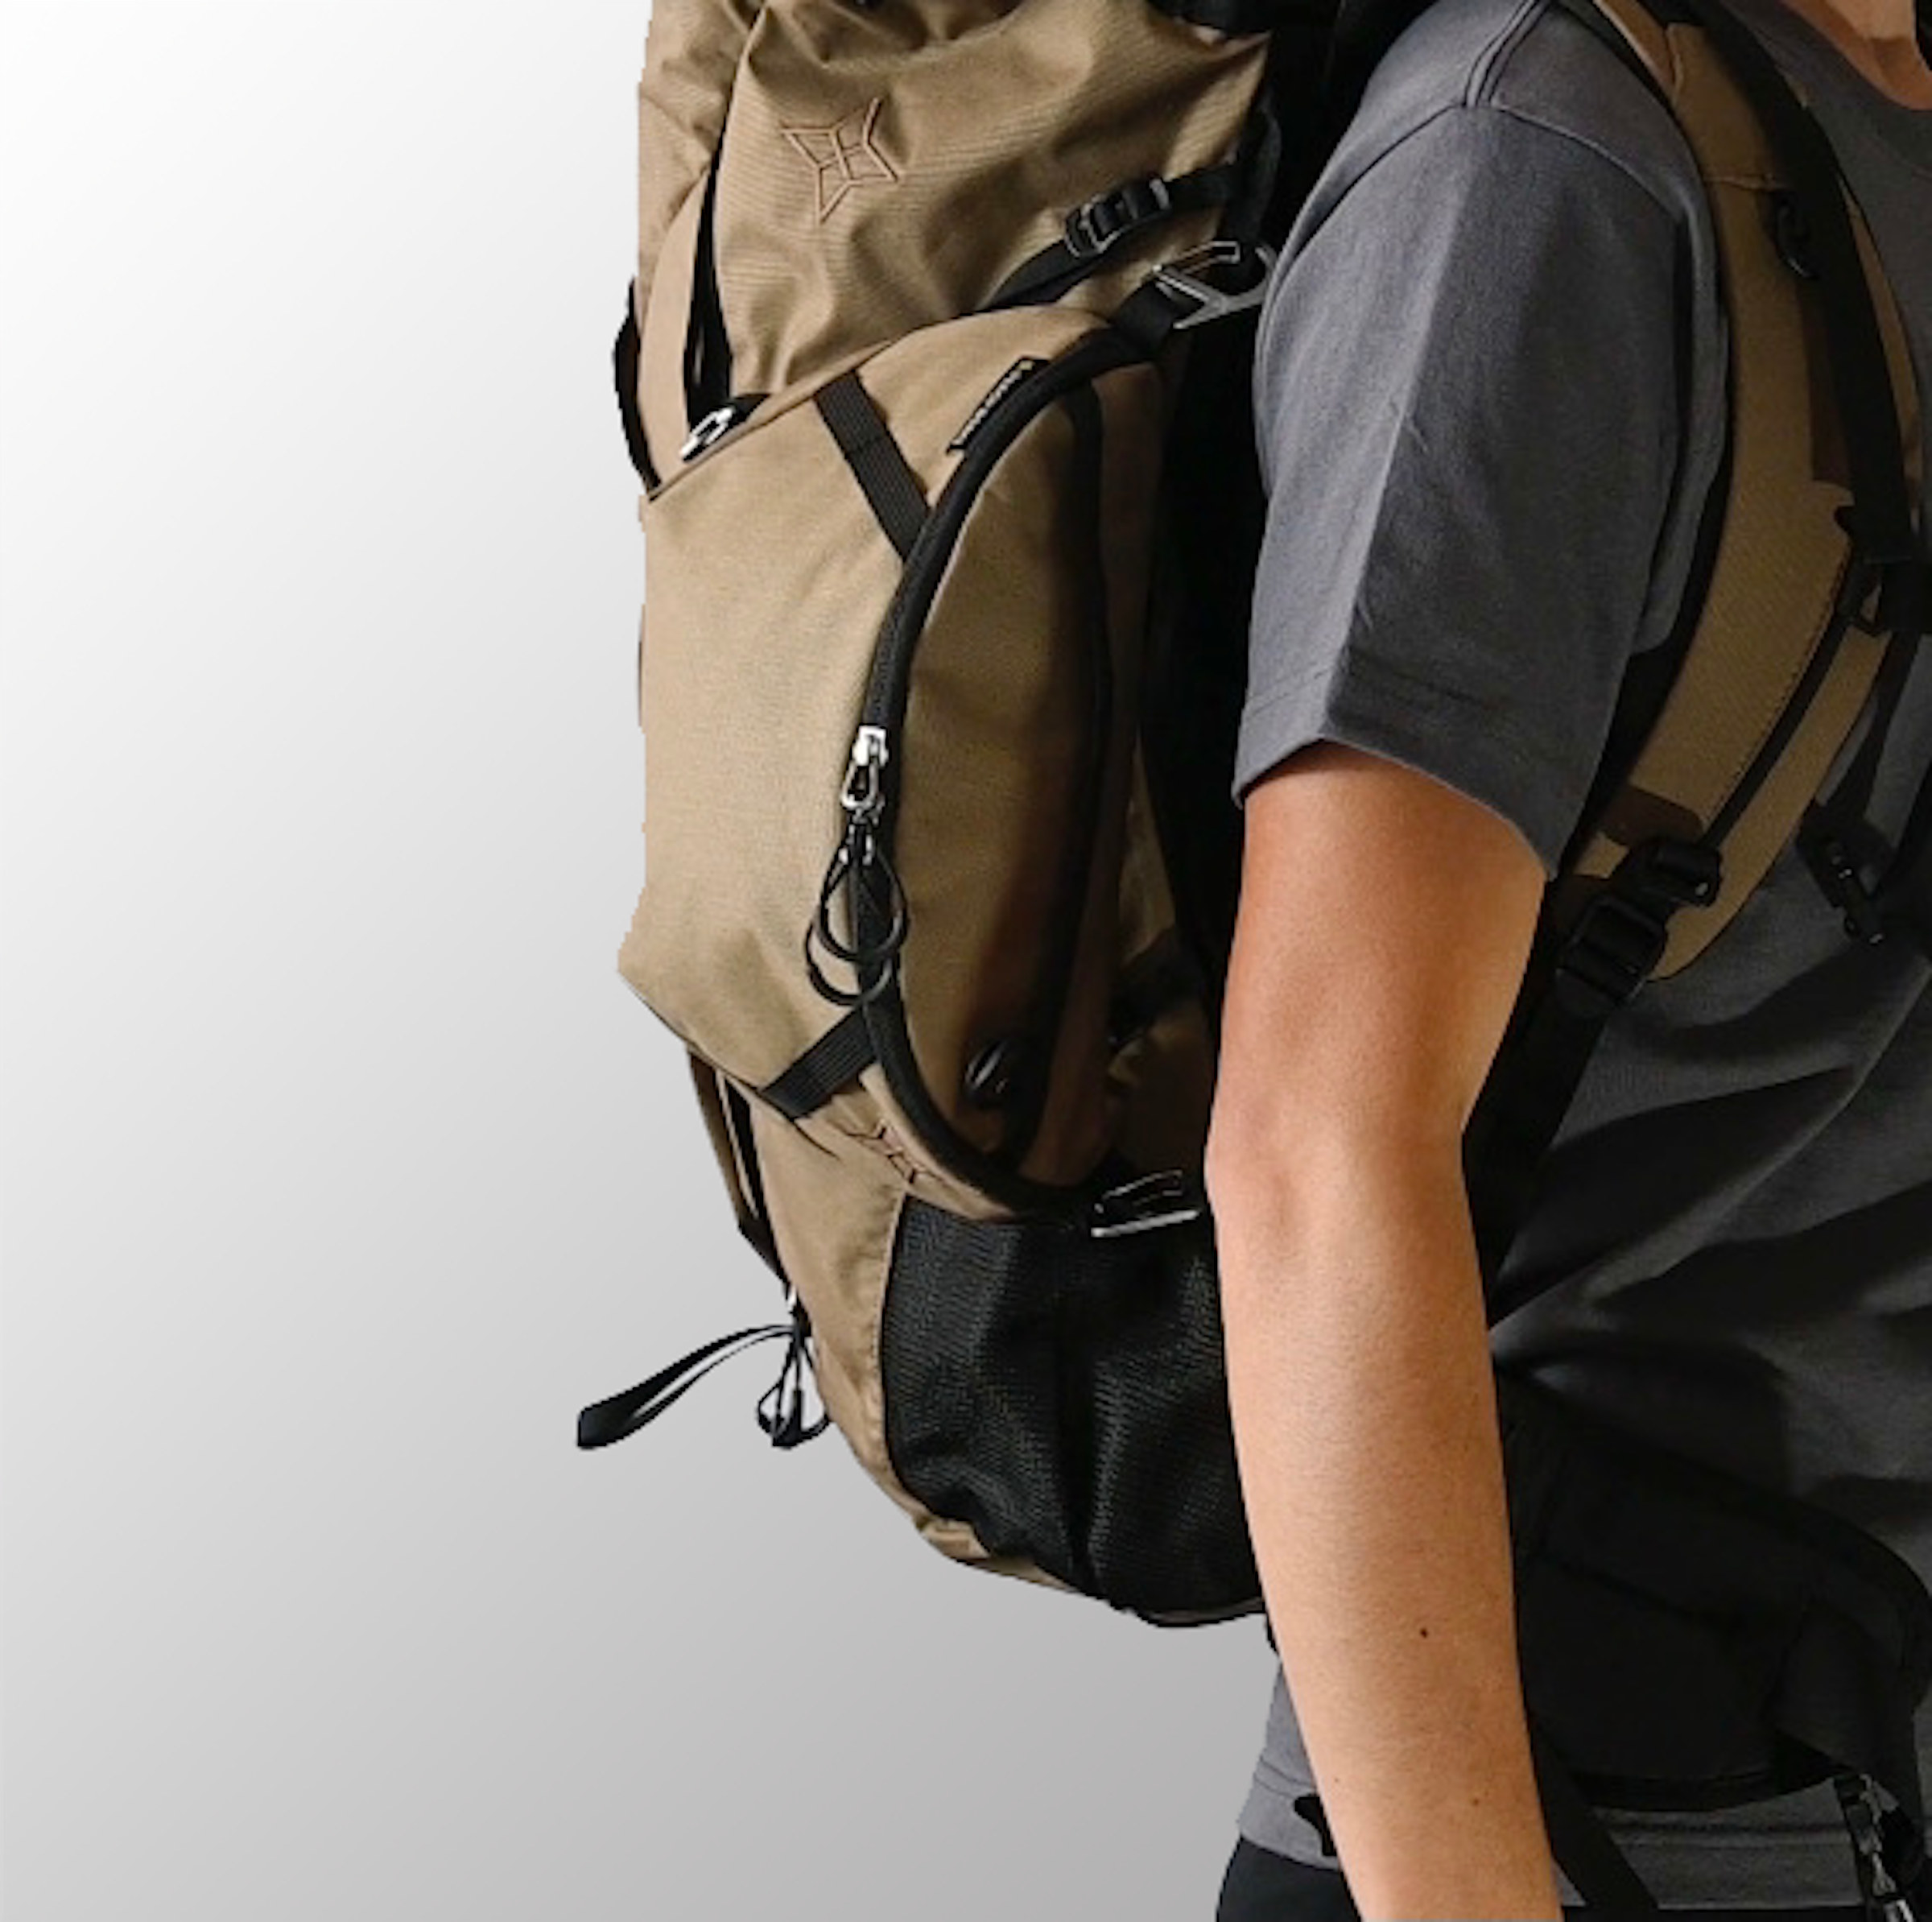 An example of hanging the 'Switch' vertically on the side of a backpack using a hook. No matter how you attach it, it's designed to look neat.